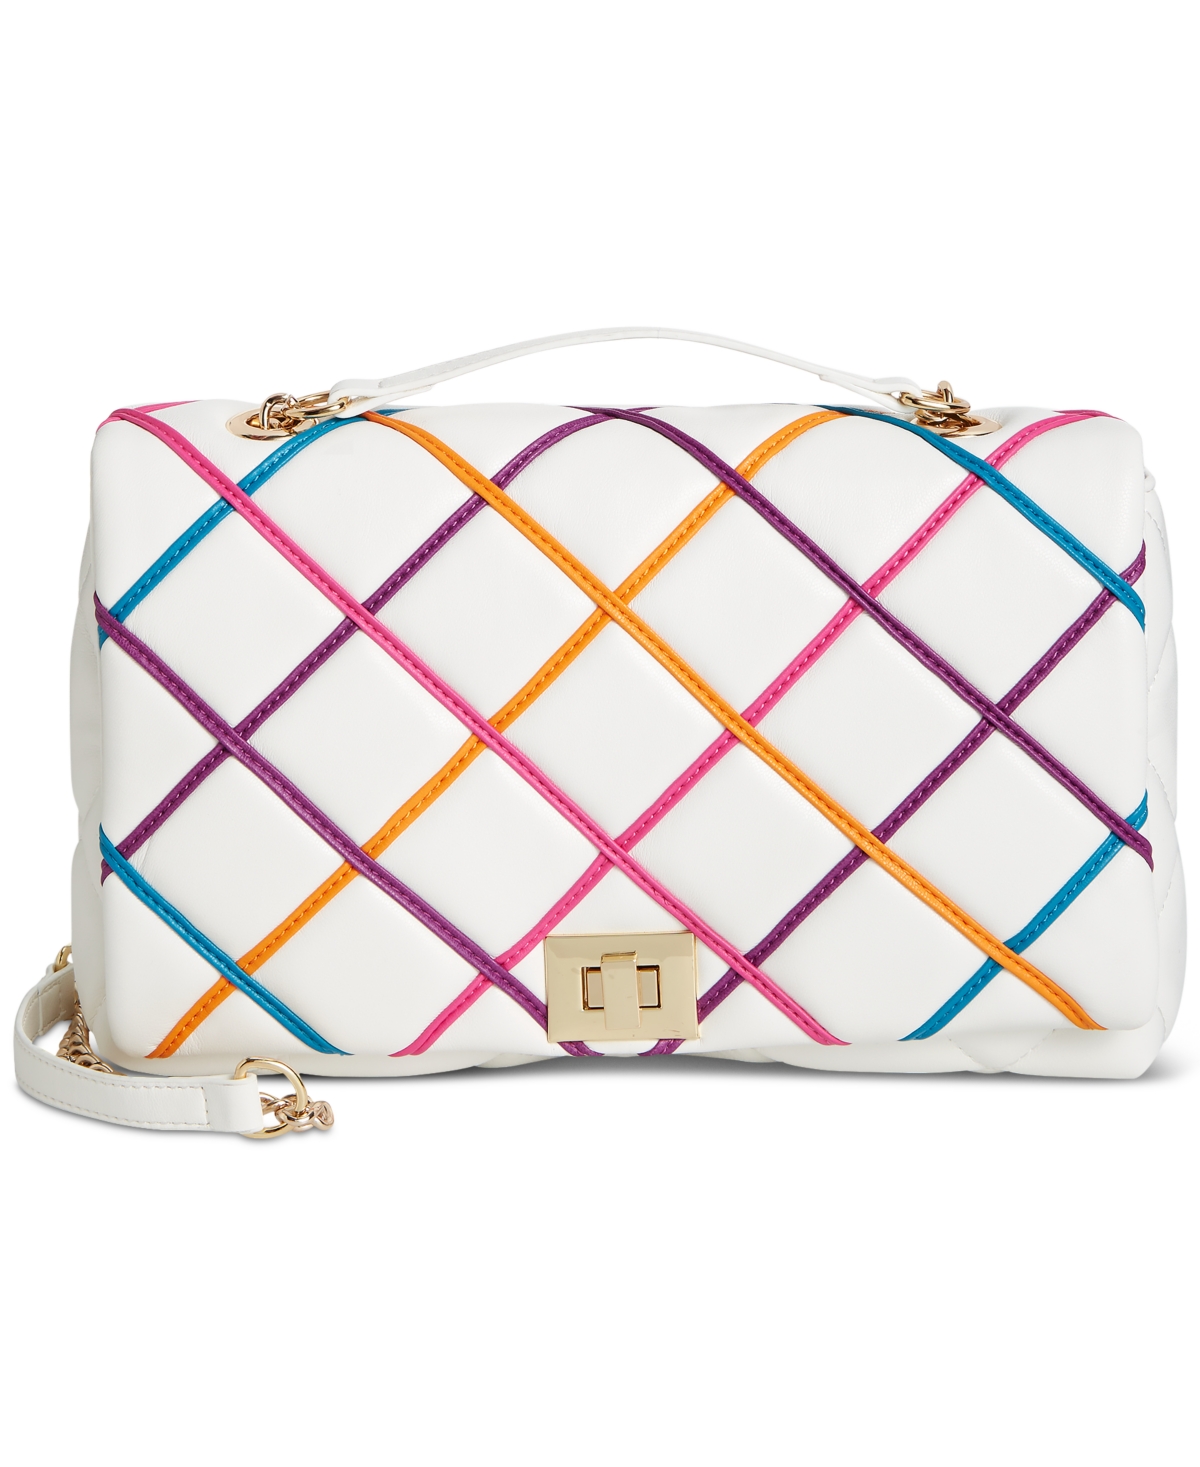 Ajae Soft Small Multi Quilted Shoulder Bag, Created for Macy's - Vanilla Multi